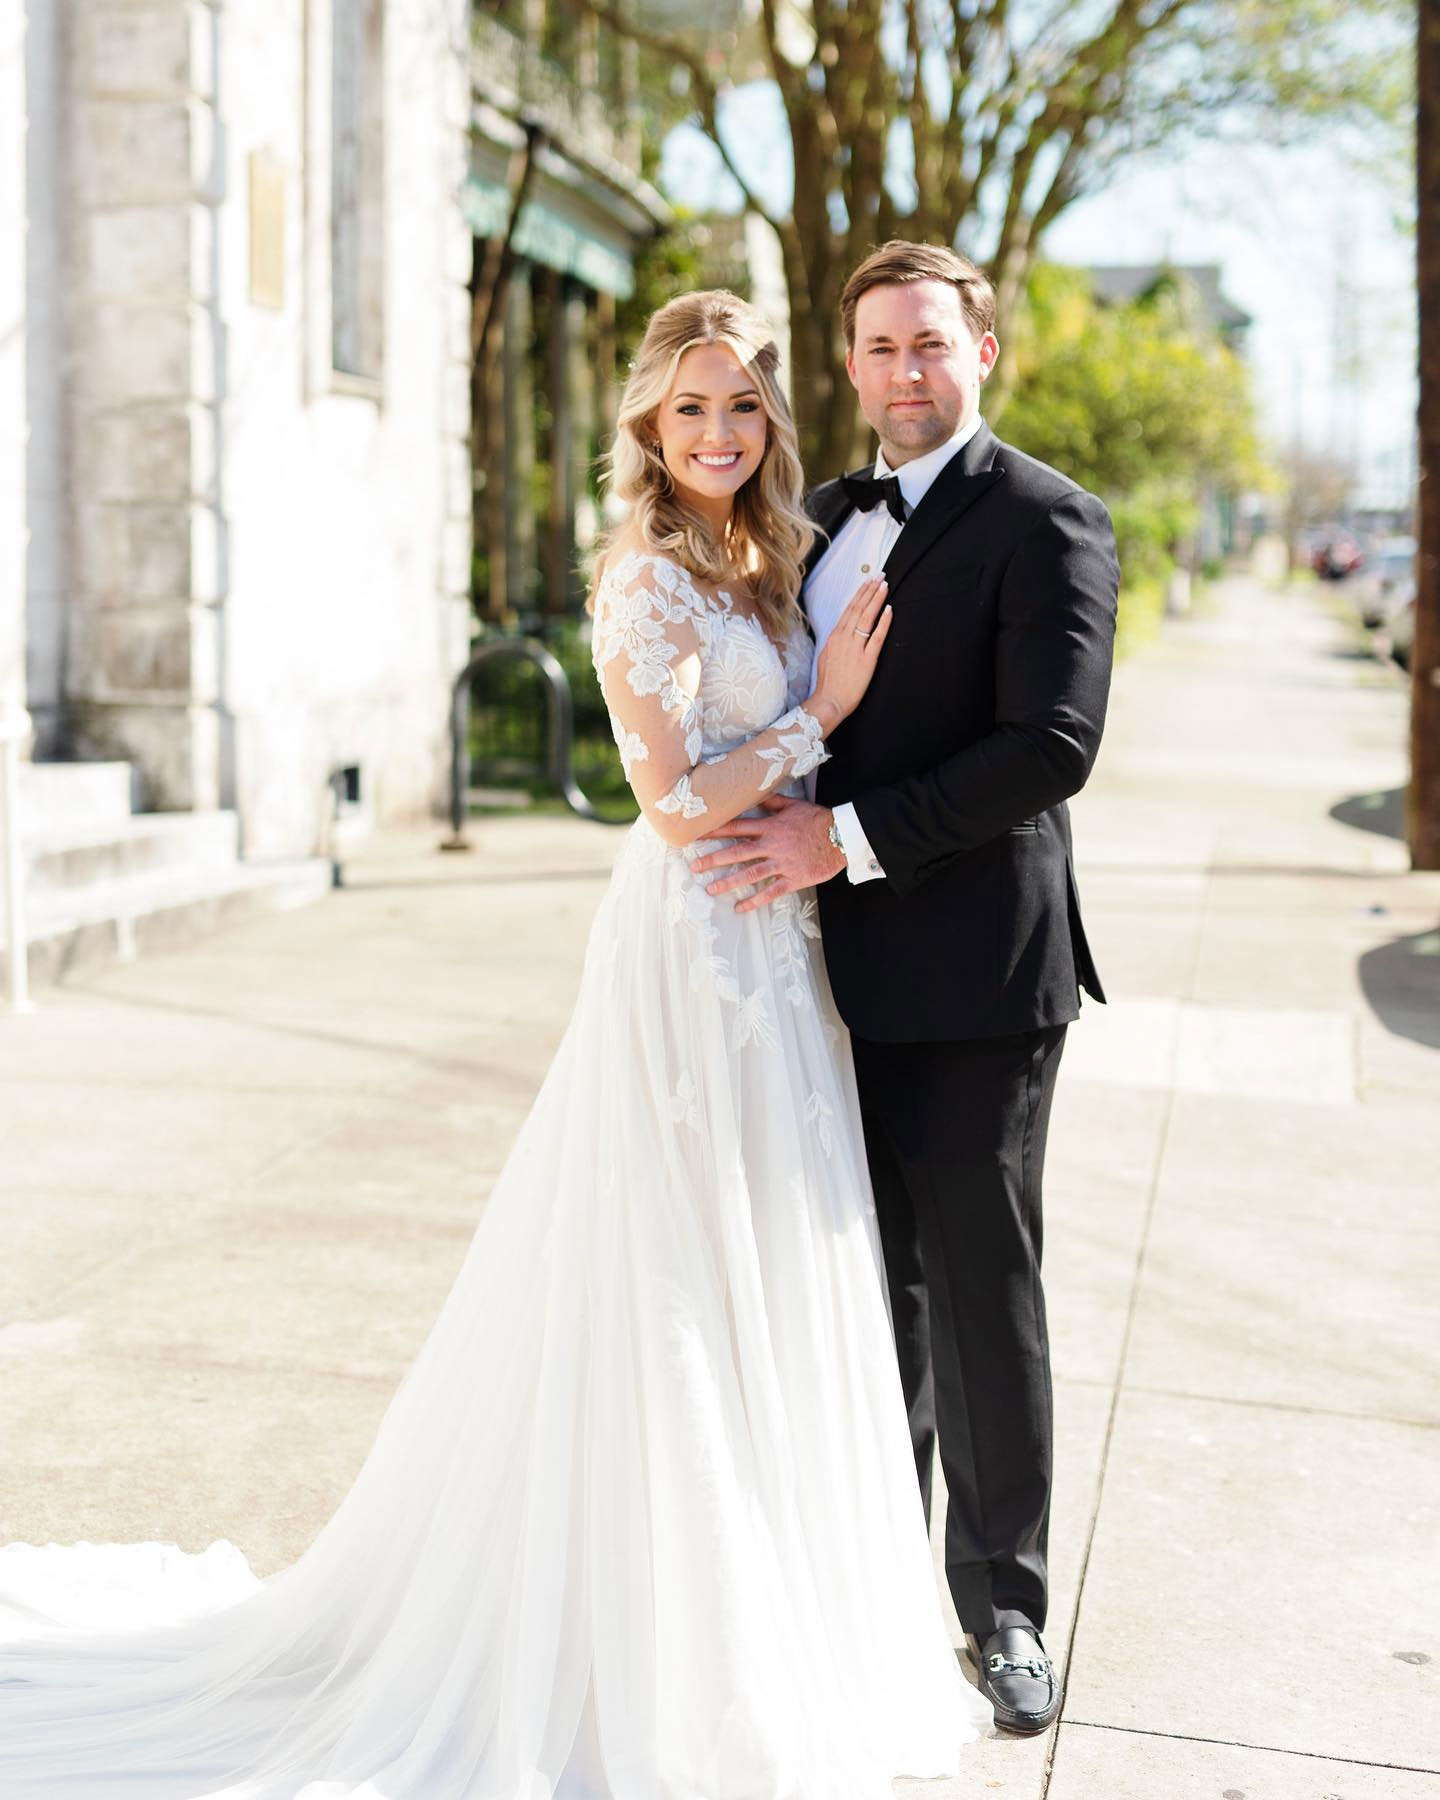 Bachelor in Paradise's Jenna Cooper Elopes With Fiance Karl Hudson